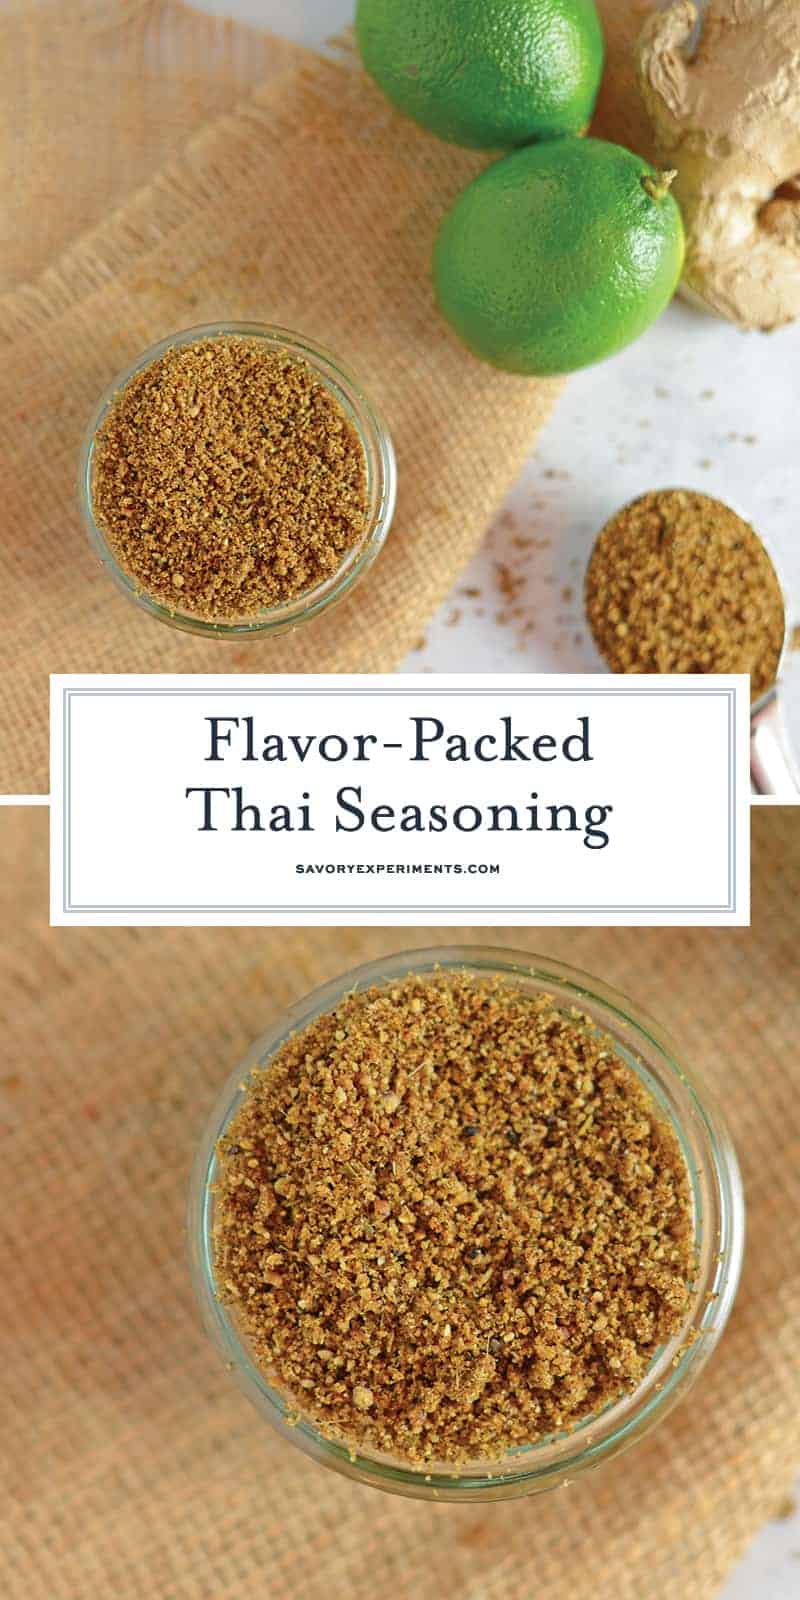 Thai Seasoning from scratch might be easier than you think! A handful of ingredients with the essence of lime and coconut, it will be a homemade seasoning blend you'll want to put on everything- Thai or not! #thaiseasoning #thaispices www.savoryexperiments.com